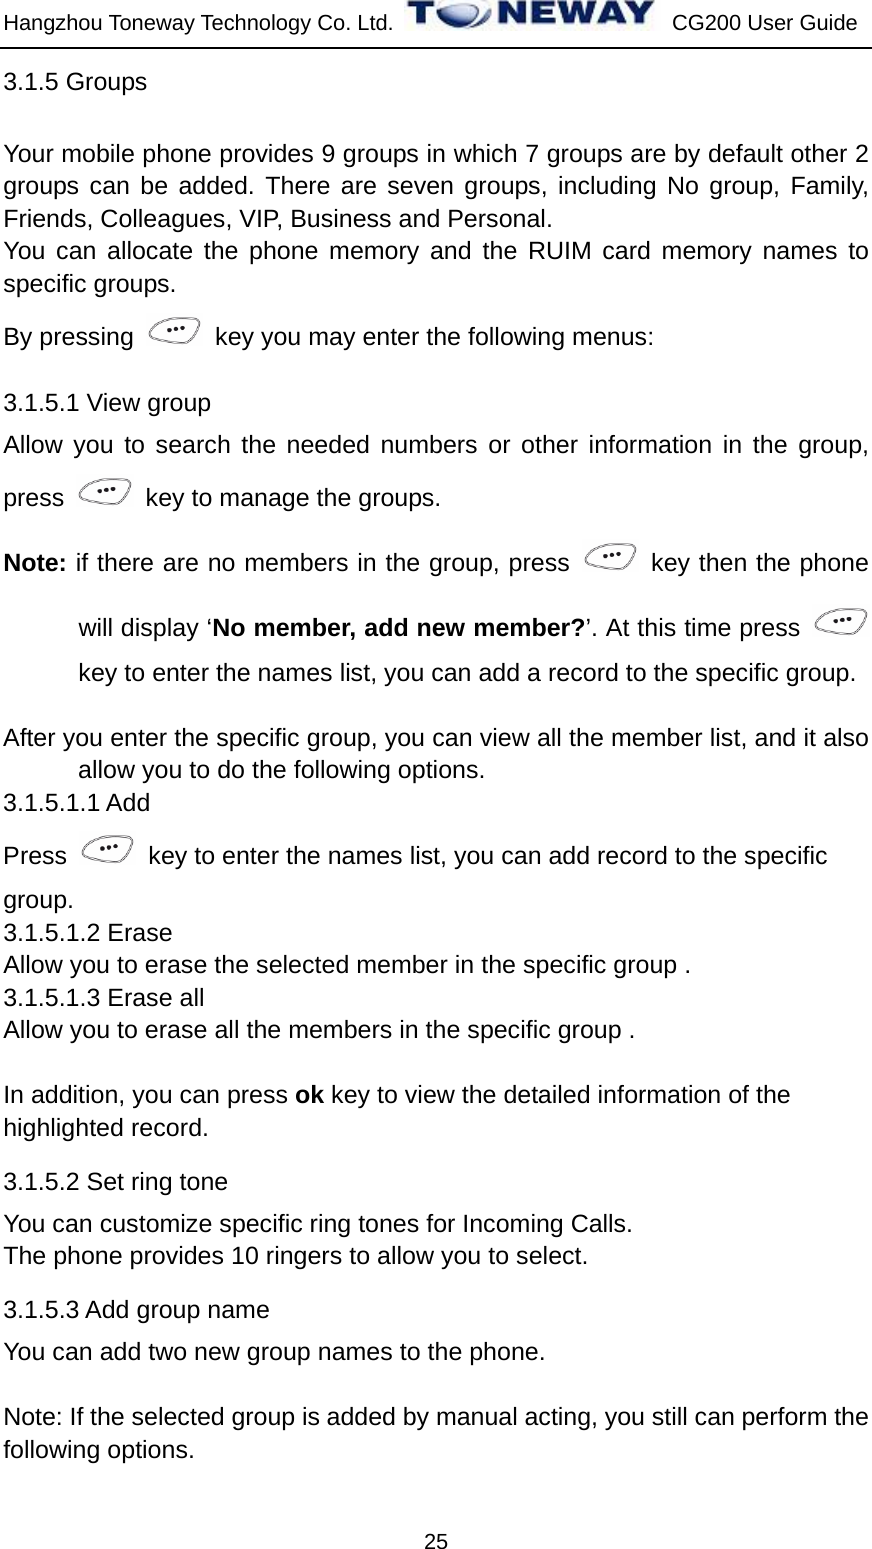 Hangzhou Toneway Technology Co. Ltd.    CG200 User Guide 25 3.1.5 Groups   Your mobile phone provides 9 groups in which 7 groups are by default other 2 groups can be added. There are seven groups, including No group, Family, Friends, Colleagues, VIP, Business and Personal. You can allocate the phone memory and the RUIM card memory names to specific groups. By pressing    key you may enter the following menus: 3.1.5.1 View group Allow you to search the needed numbers or other information in the group, press    key to manage the groups. Note: if there are no members in the group, press    key then the phone will display ‘No member, add new member?’. At this time press   key to enter the names list, you can add a record to the specific group.    After you enter the specific group, you can view all the member list, and it also allow you to do the following options. 3.1.5.1.1 Add   Press    key to enter the names list, you can add record to the specific   group. 3.1.5.1.2 Erase Allow you to erase the selected member in the specific group . 3.1.5.1.3 Erase all Allow you to erase all the members in the specific group .    In addition, you can press ok key to view the detailed information of the   highlighted record. 3.1.5.2 Set ring tone You can customize specific ring tones for Incoming Calls. The phone provides 10 ringers to allow you to select. 3.1.5.3 Add group name You can add two new group names to the phone.  Note: If the selected group is added by manual acting, you still can perform the following options. 